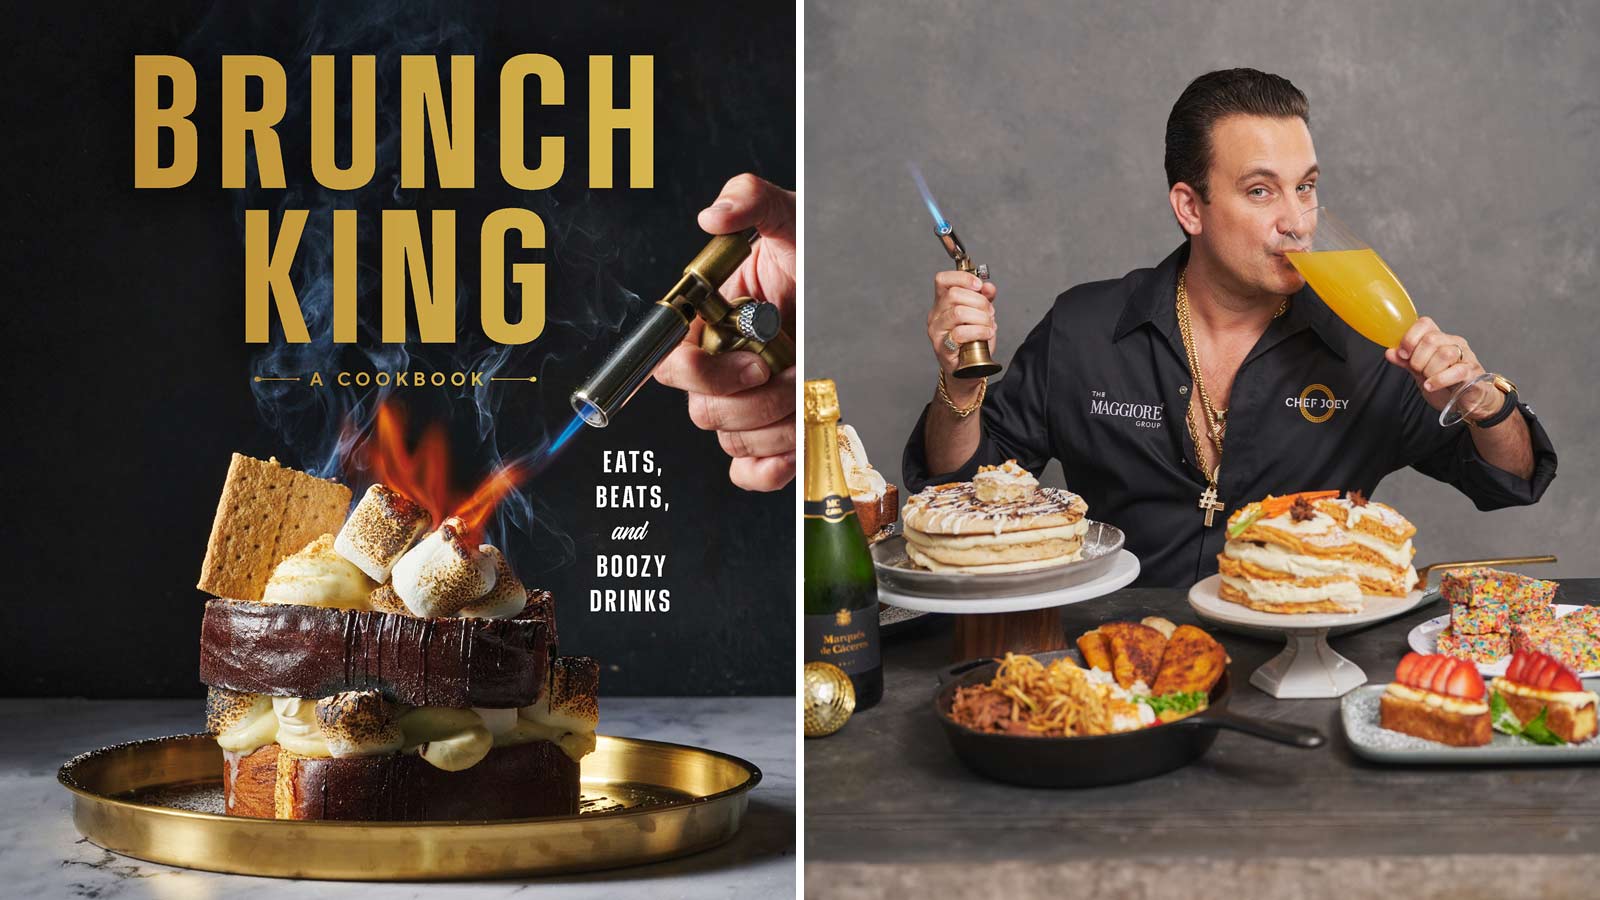 Split panel image showing the cover of “Brunch King: Eats, Beats, and Boozy Drinks” on the left...